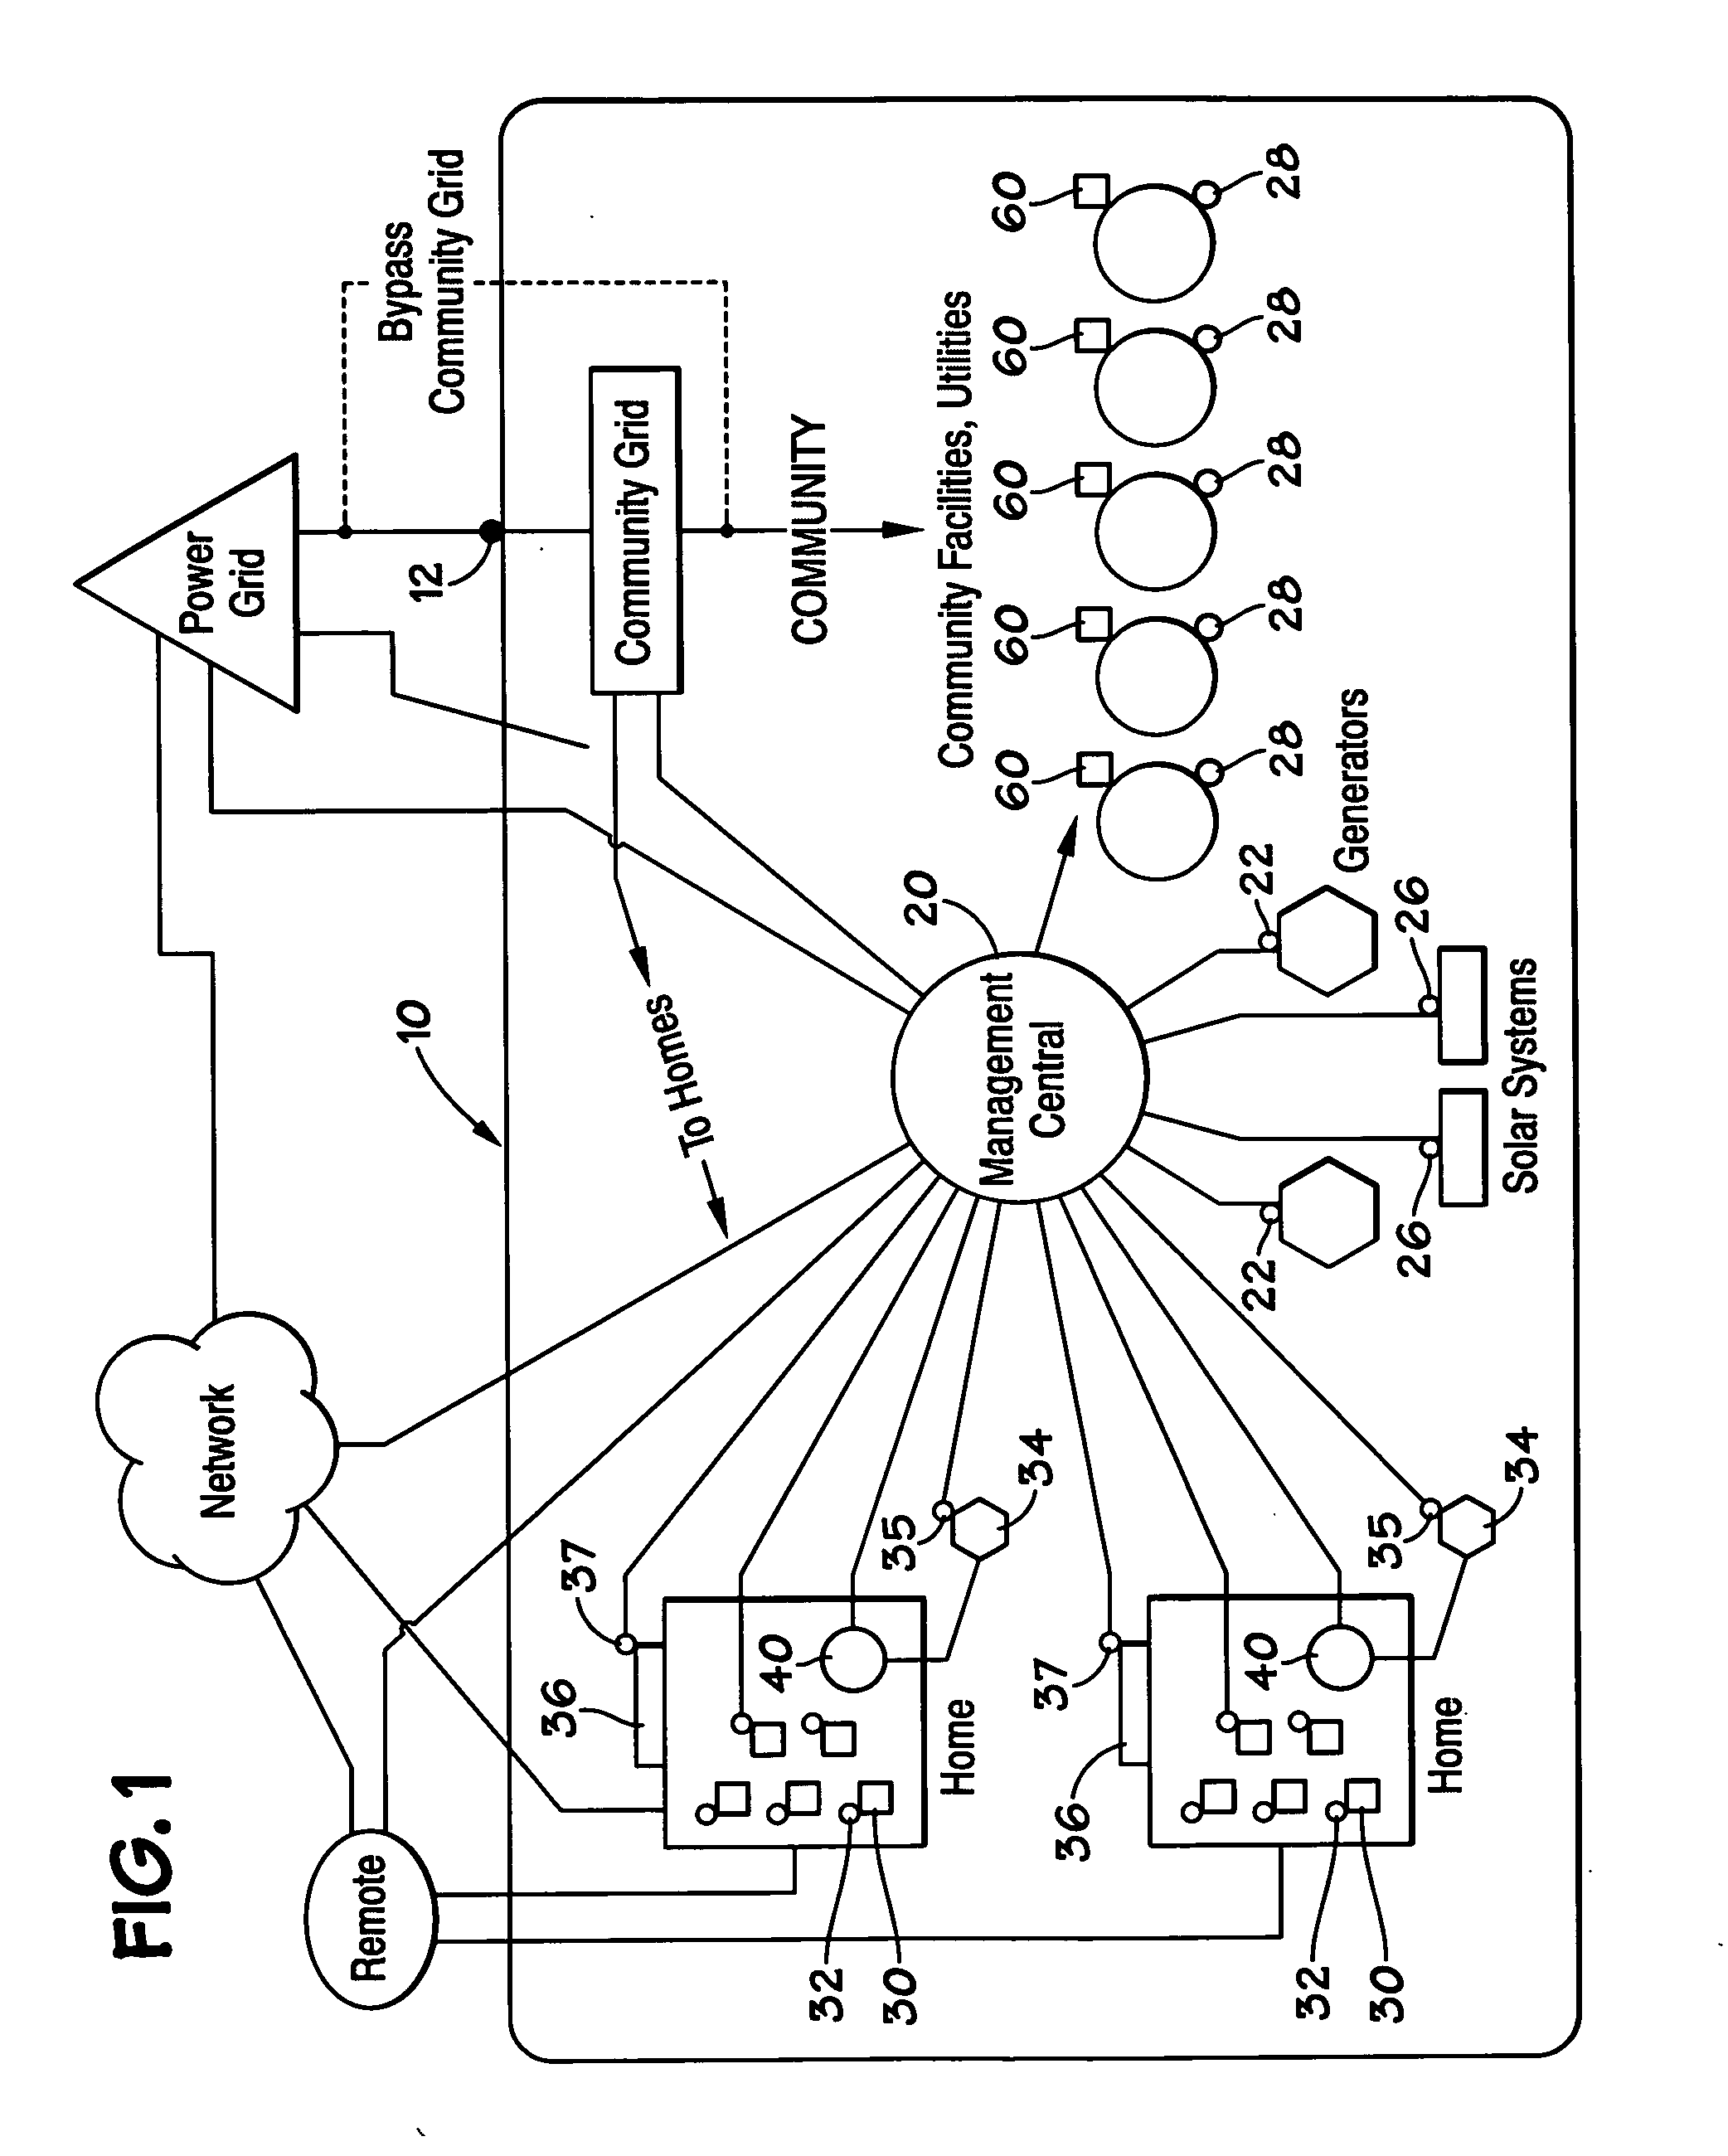 Community resource management systems and methods